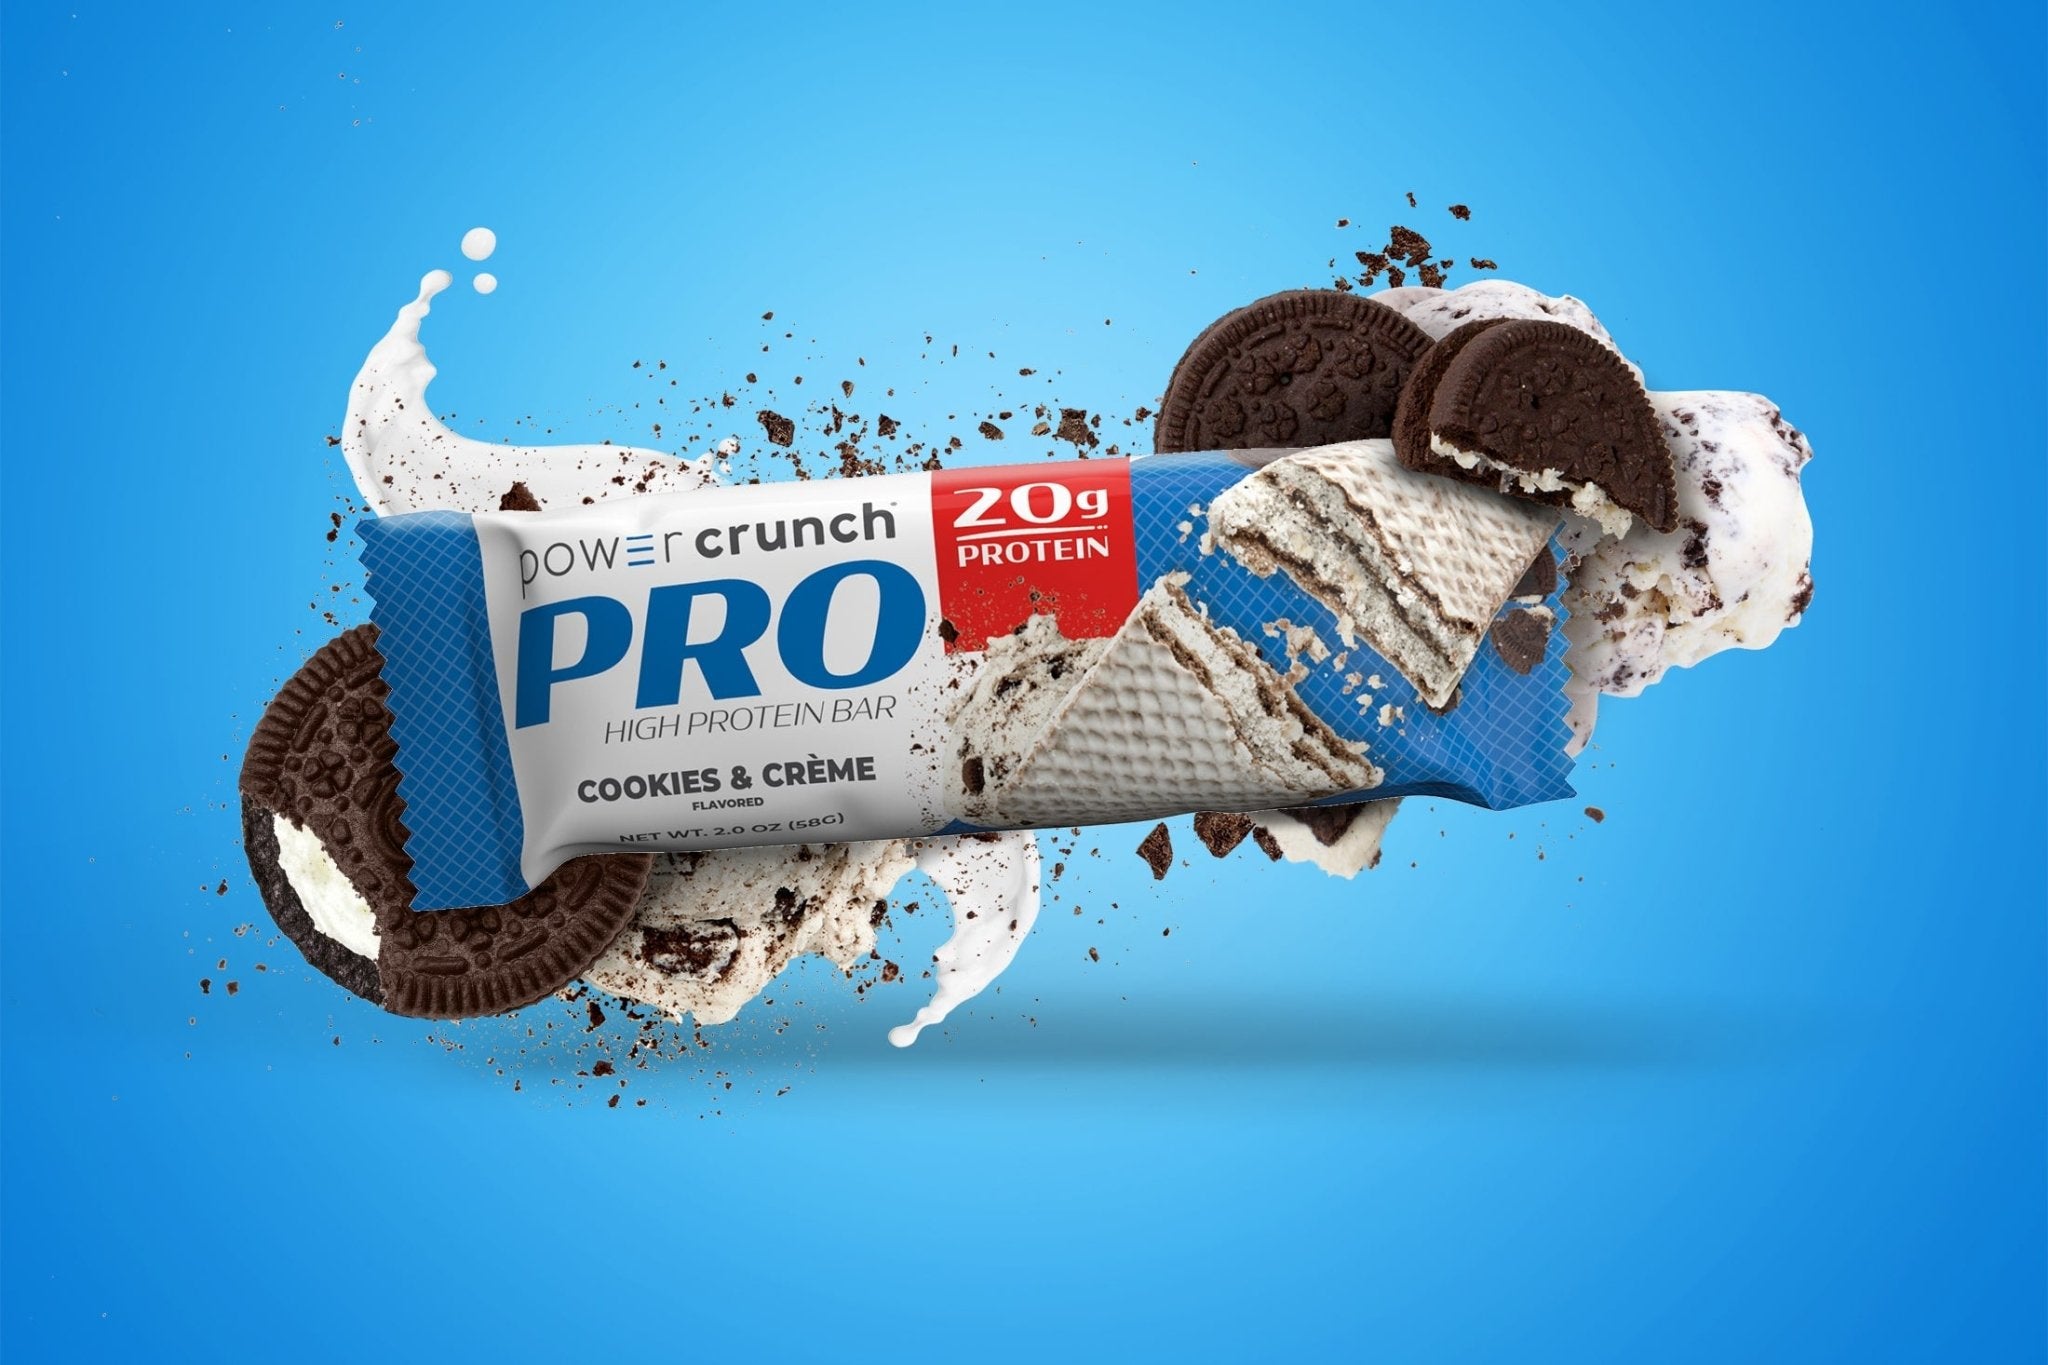 PRO Cookies and Cream 20g protein bars pictured with Cookies and Cream flavor explosion